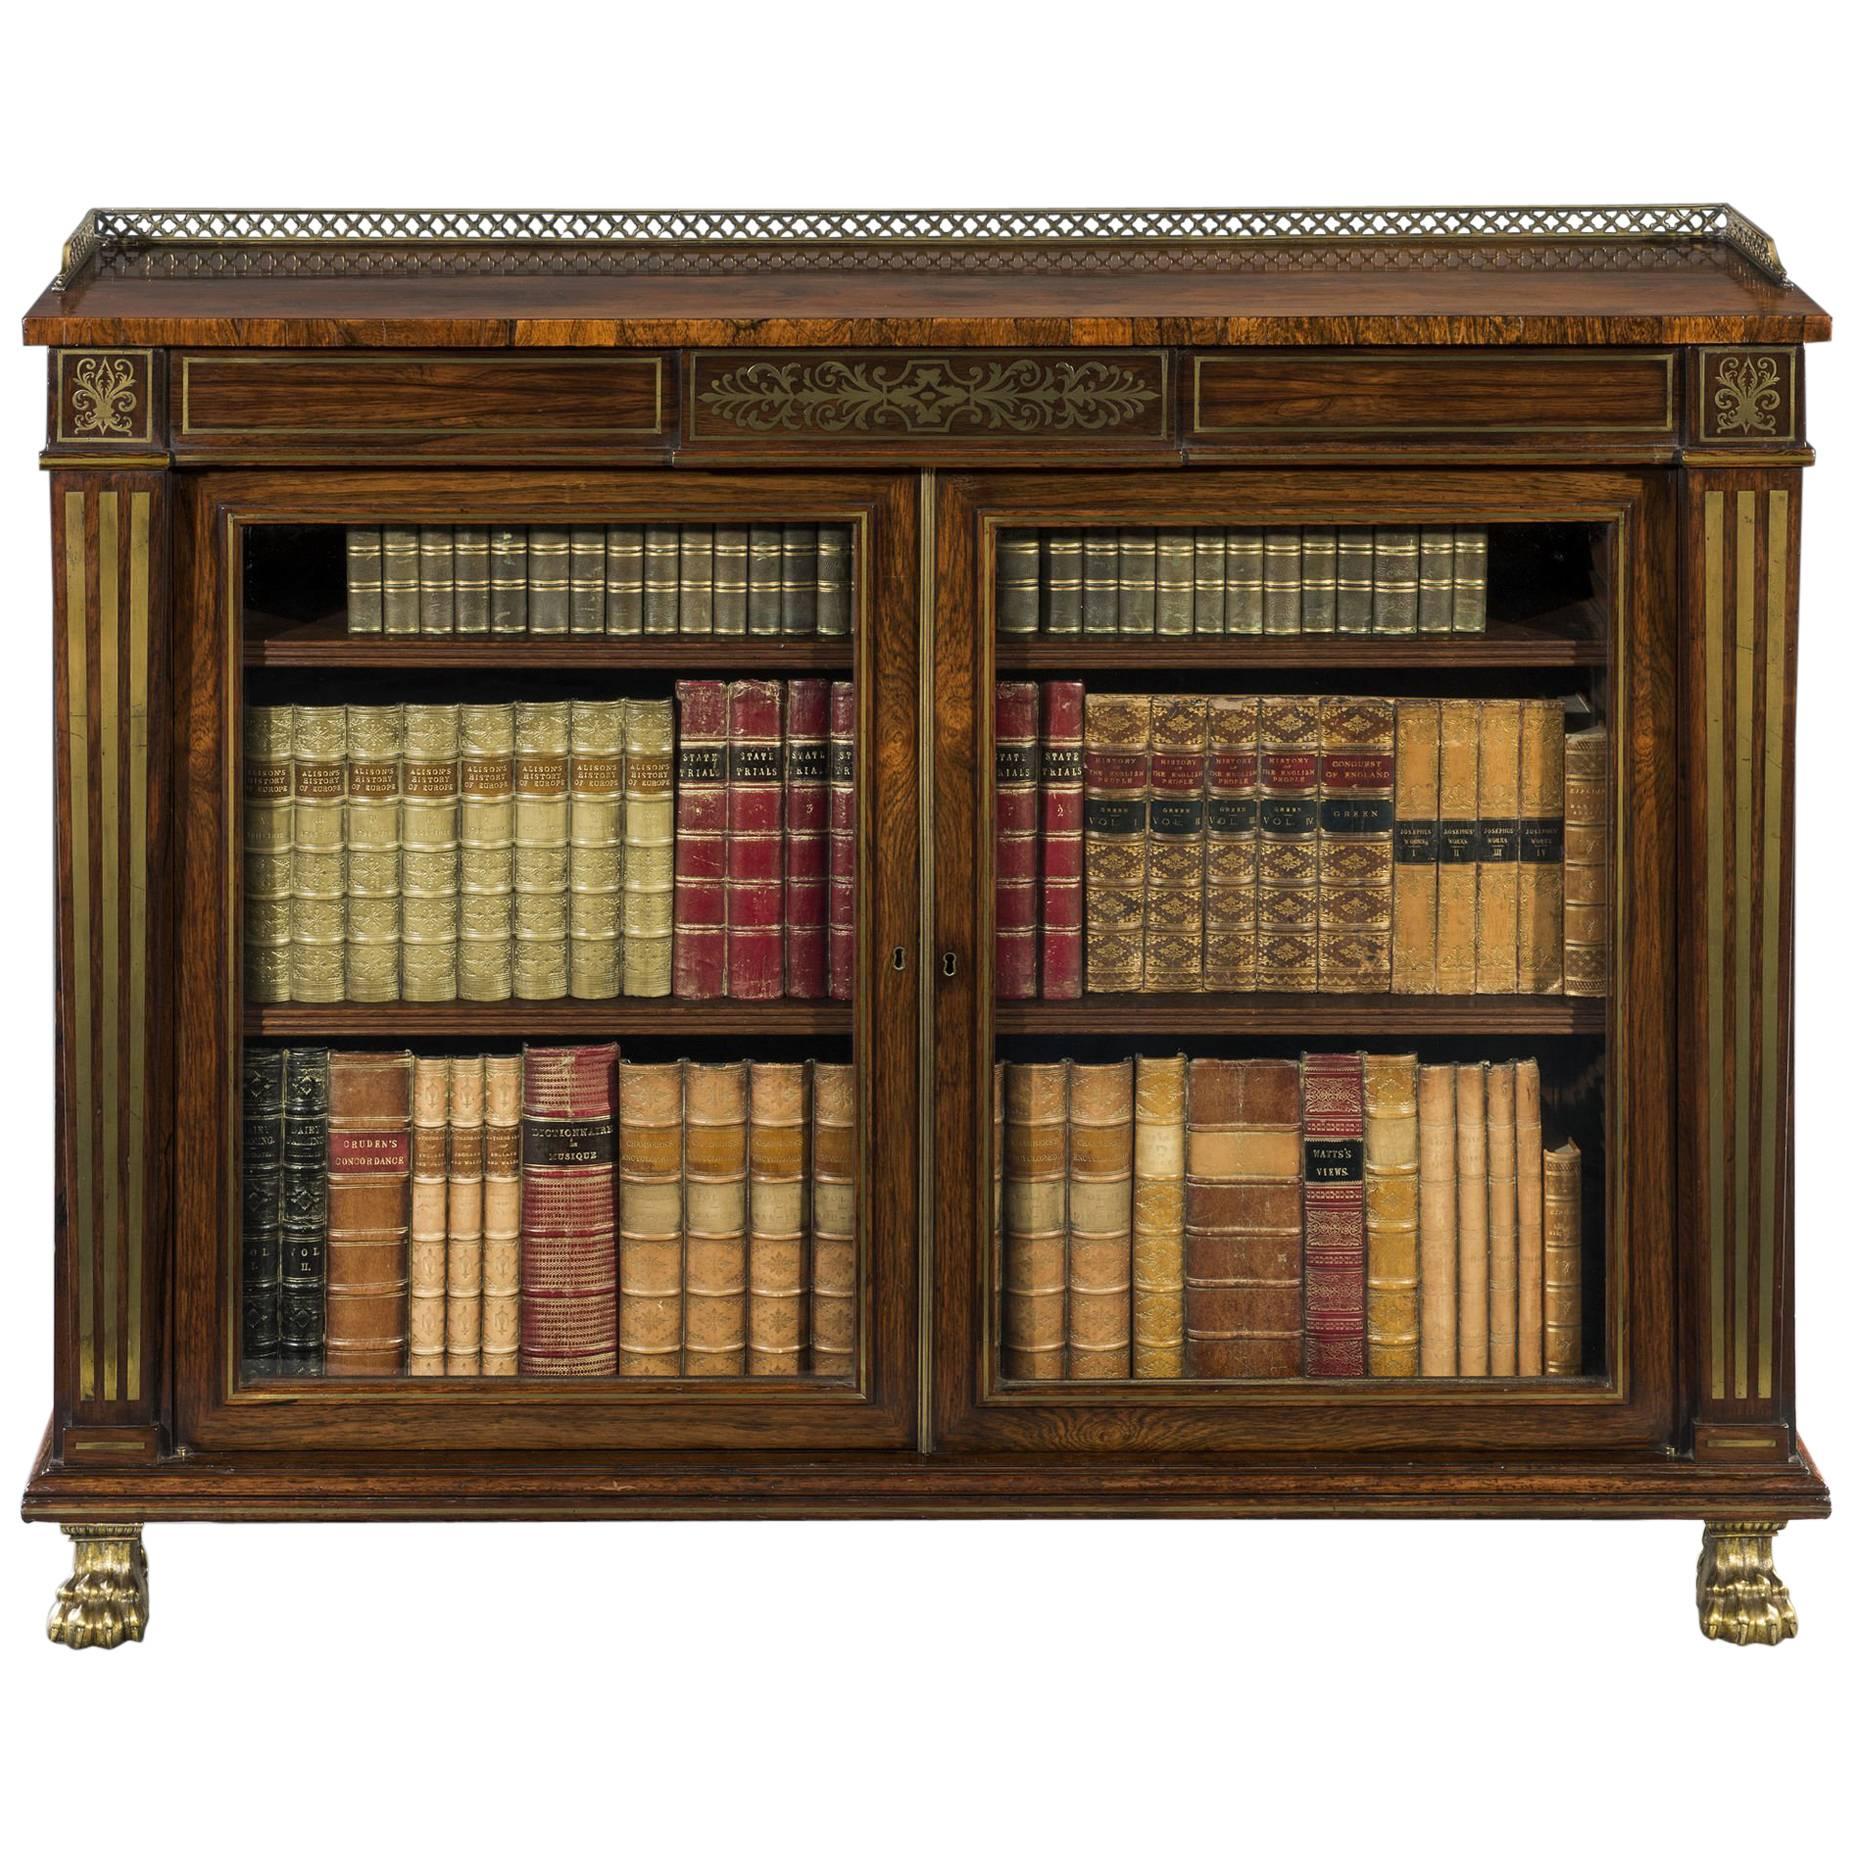 Early 19th Century Regency Period Rosewood and Brass Inlaid Dwarf Bookcase For Sale